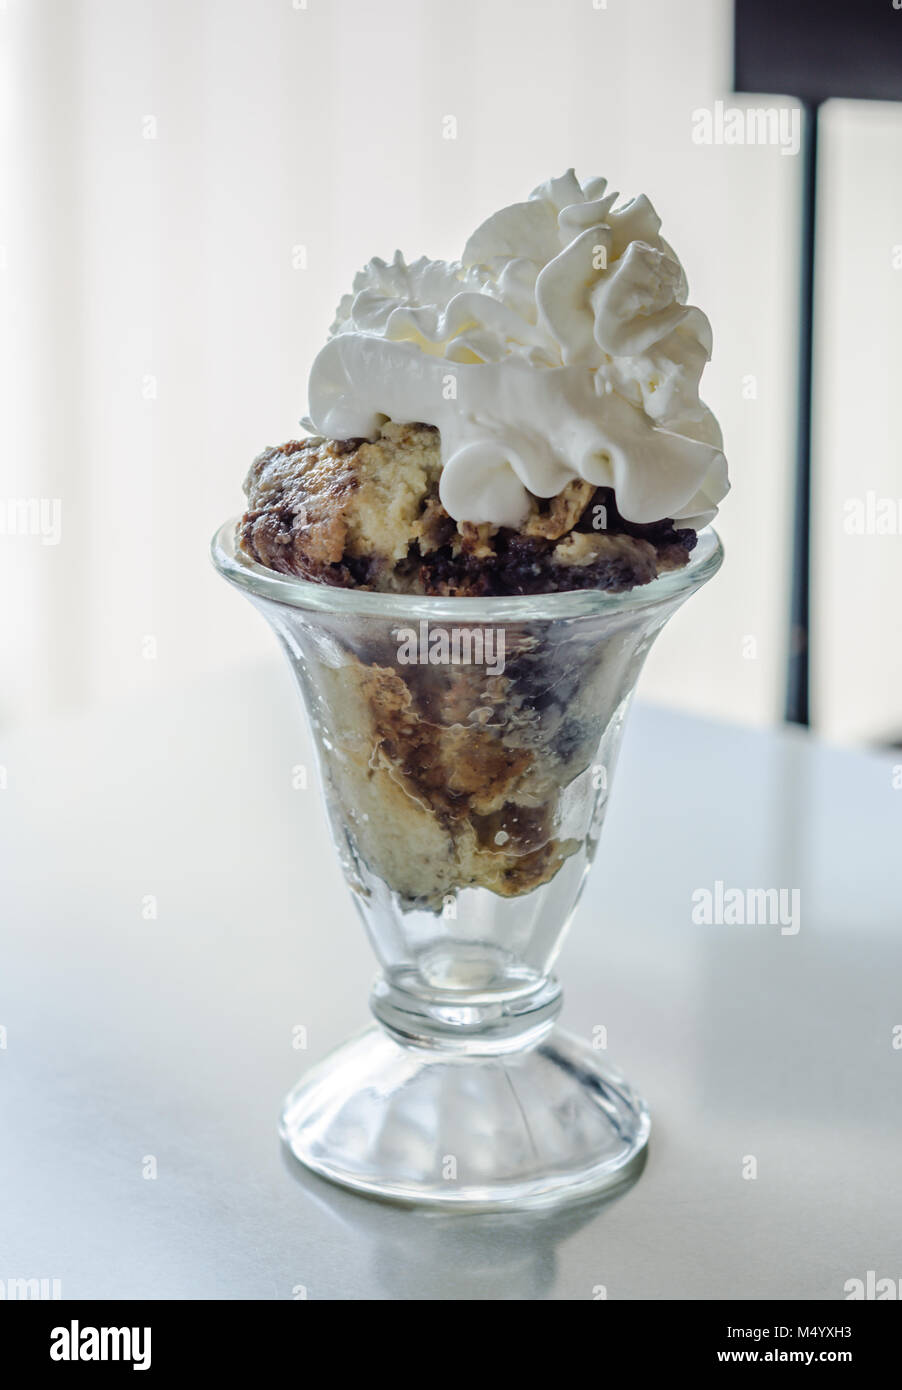 Layers of blueberry cobbler topped with fresh whipped cream in a parlor ice cream glass. Stock Photo